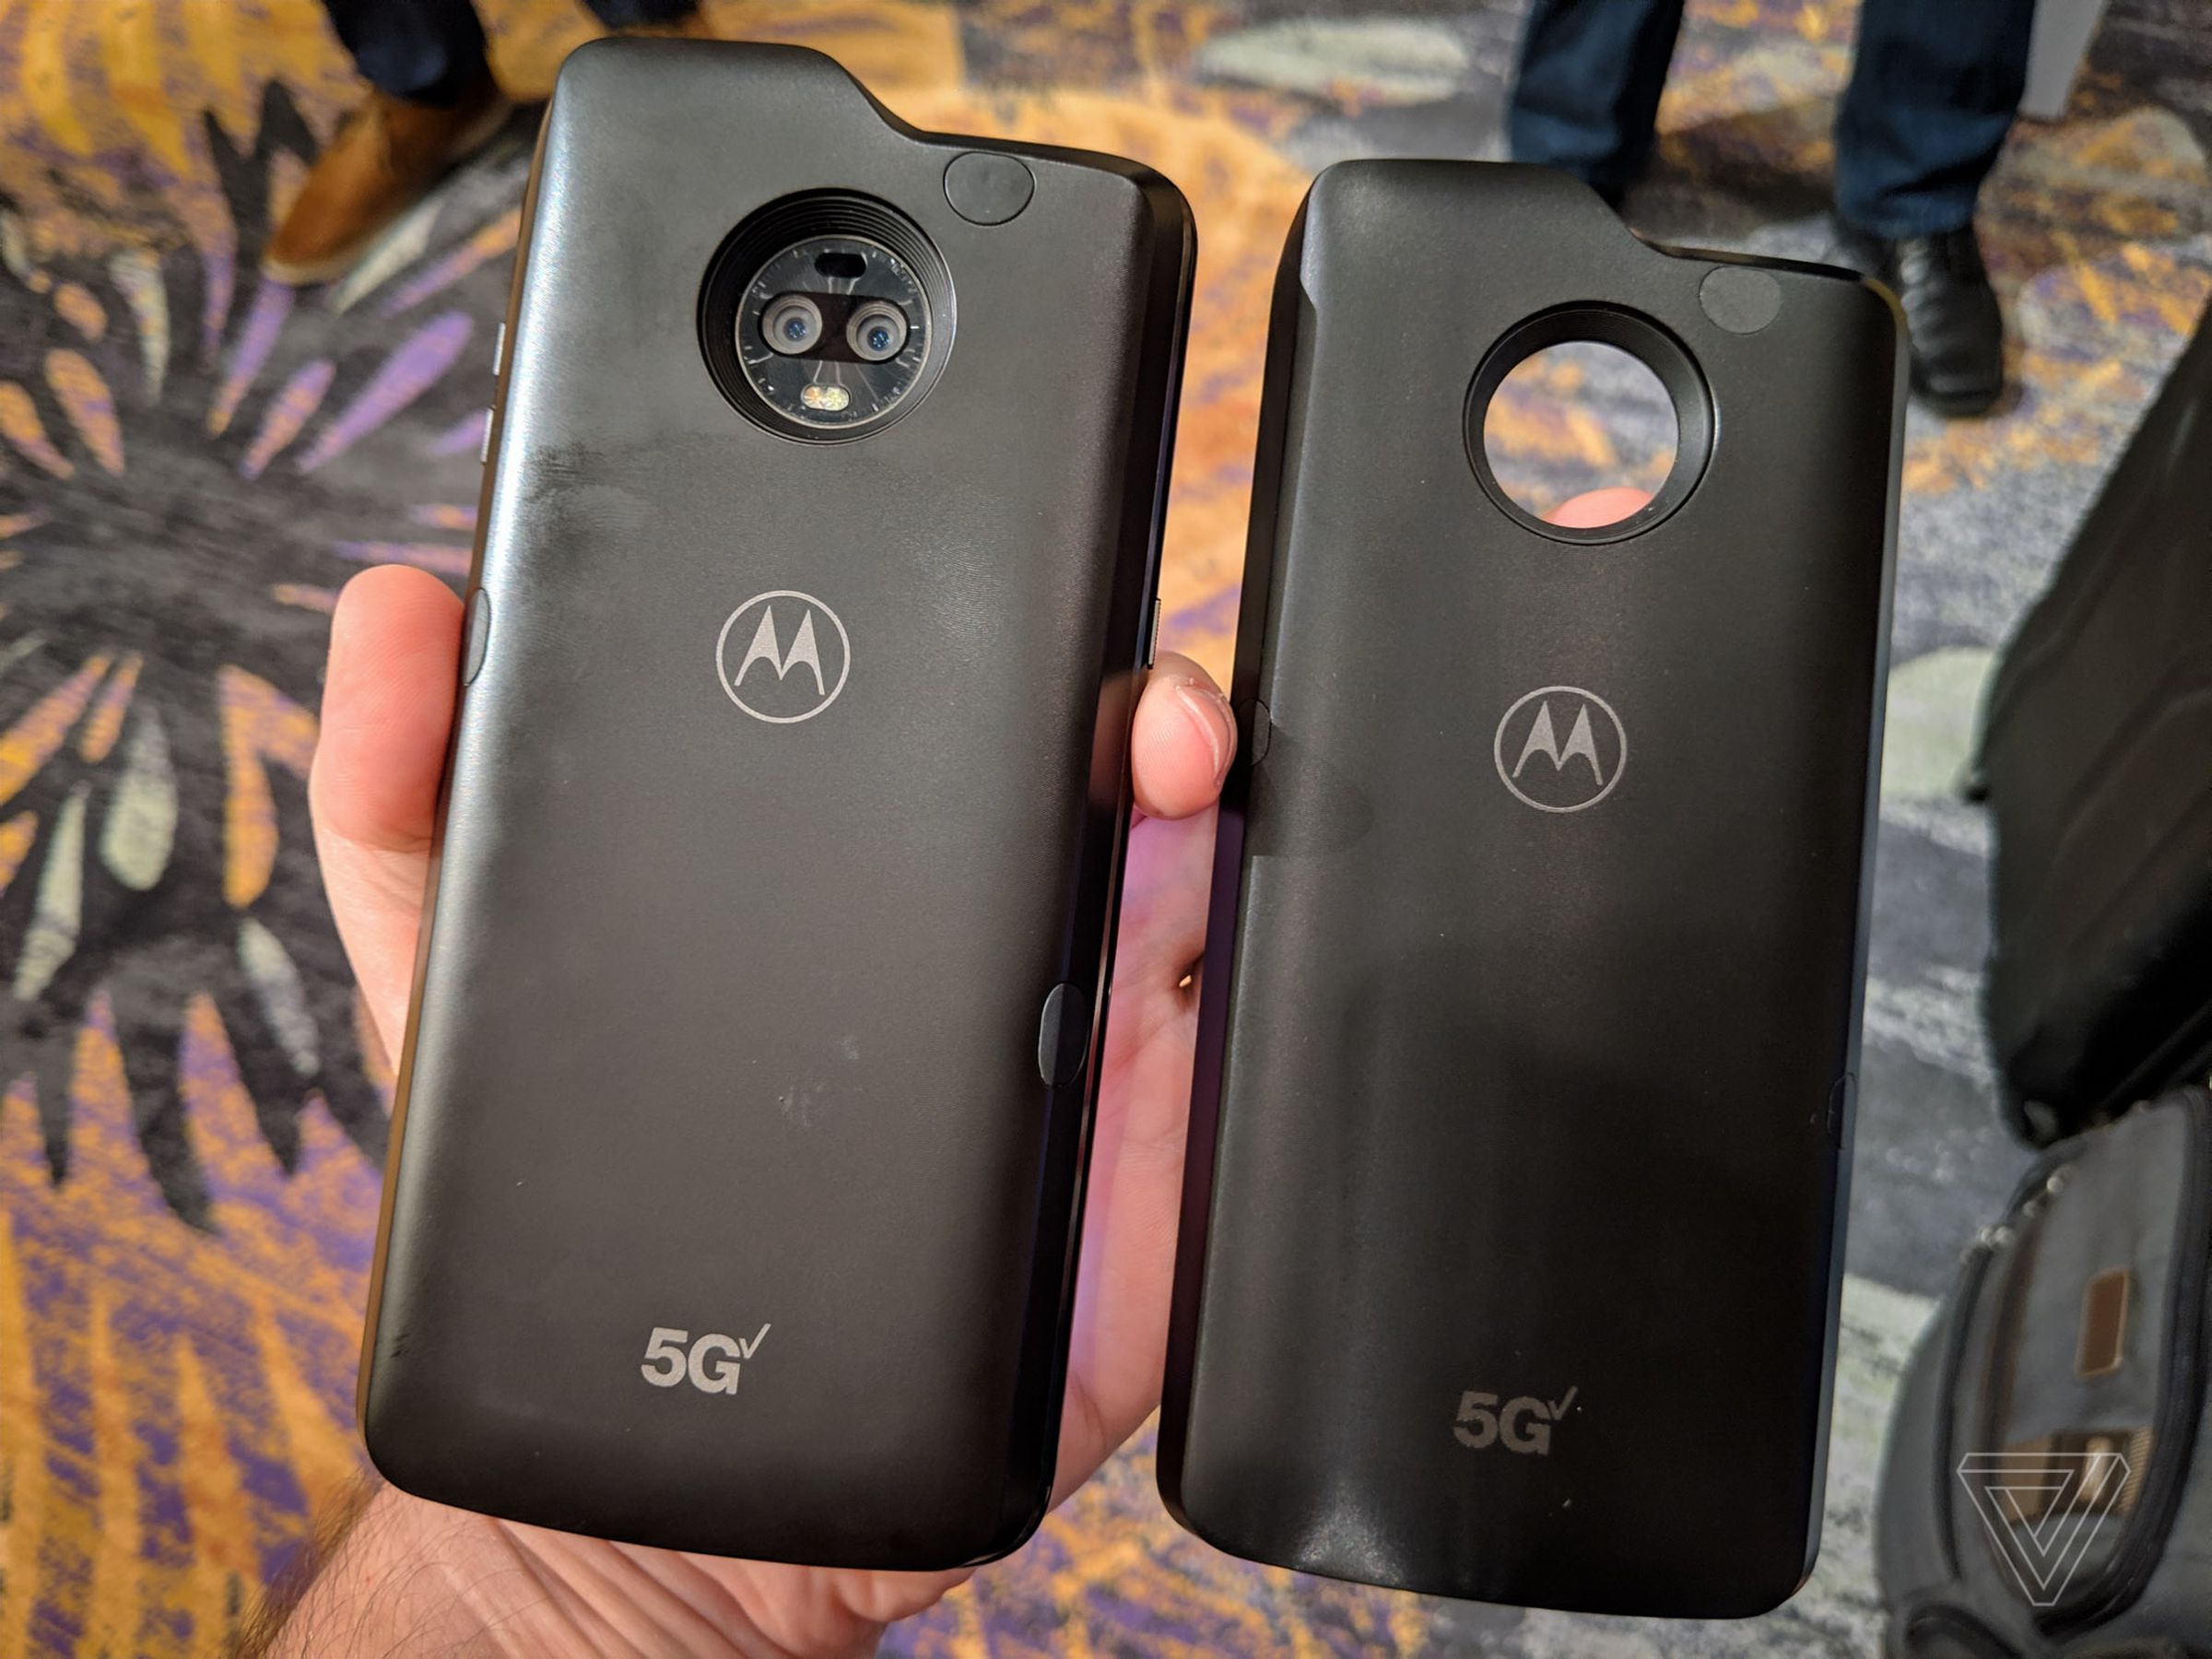 You can see the antenna locations on these 5G Moto Mod prototypes.